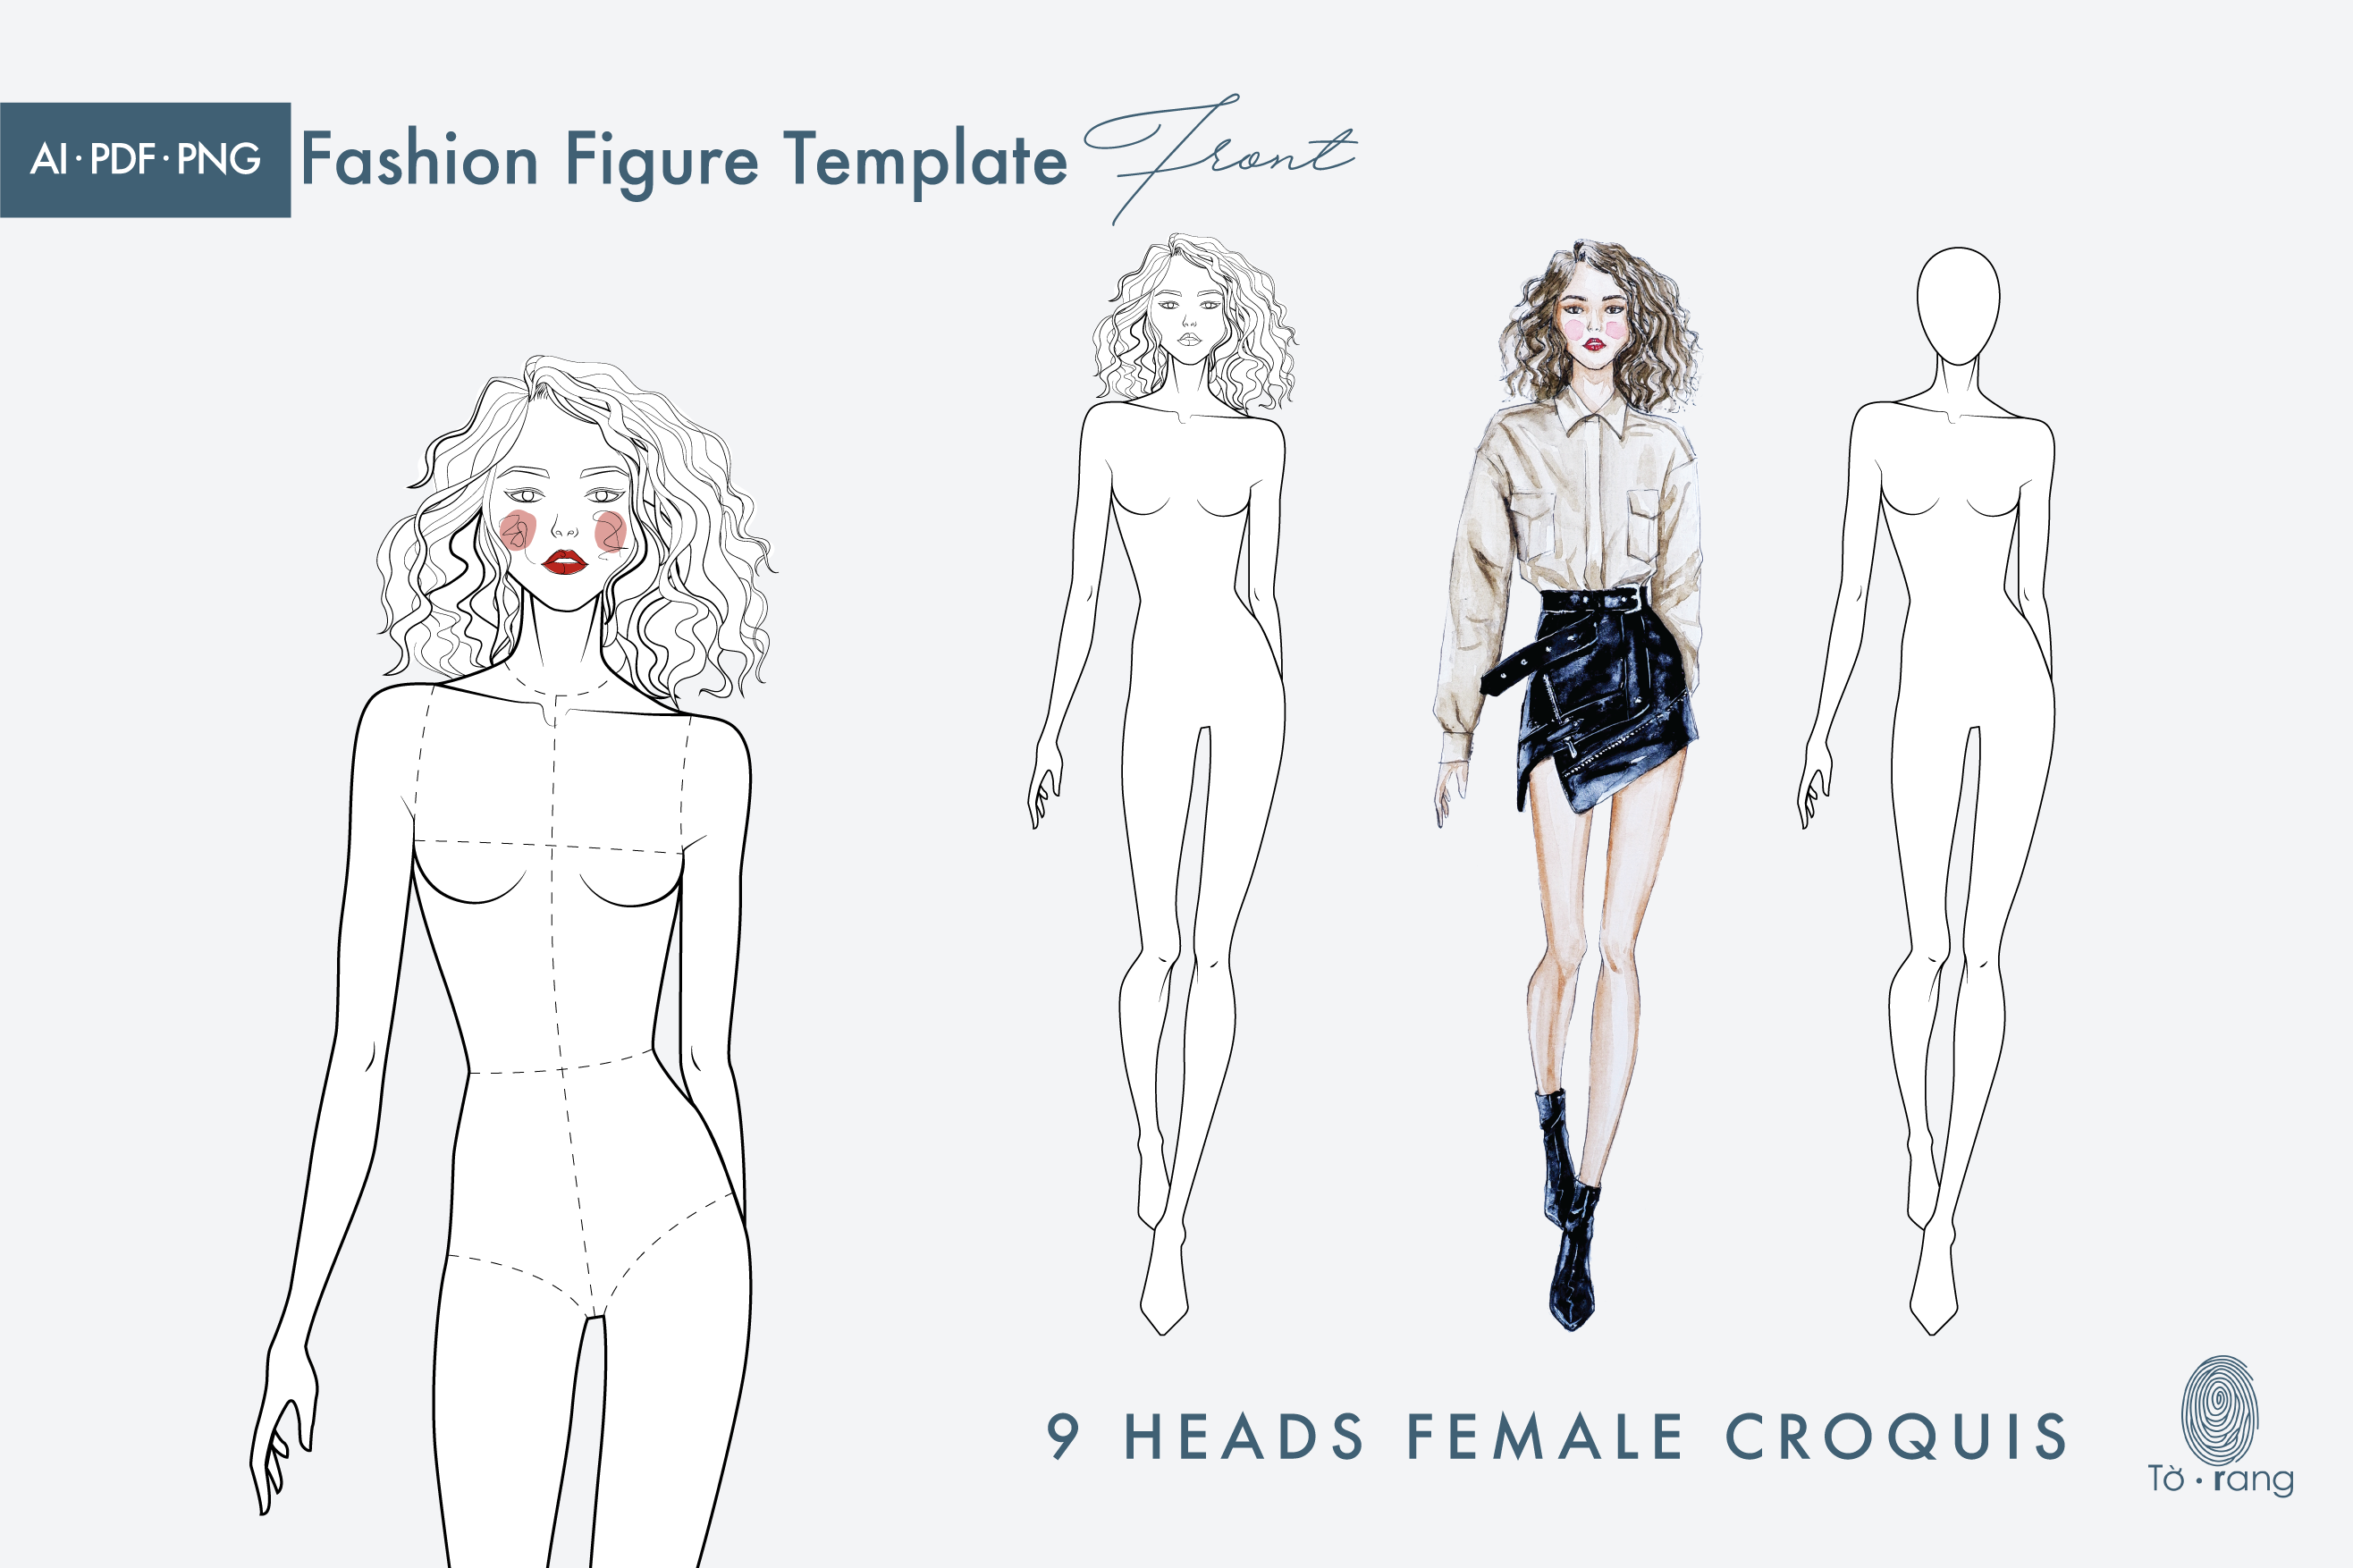 Female Human Figure Template Drafting And Design Templates Stencil Symbols 